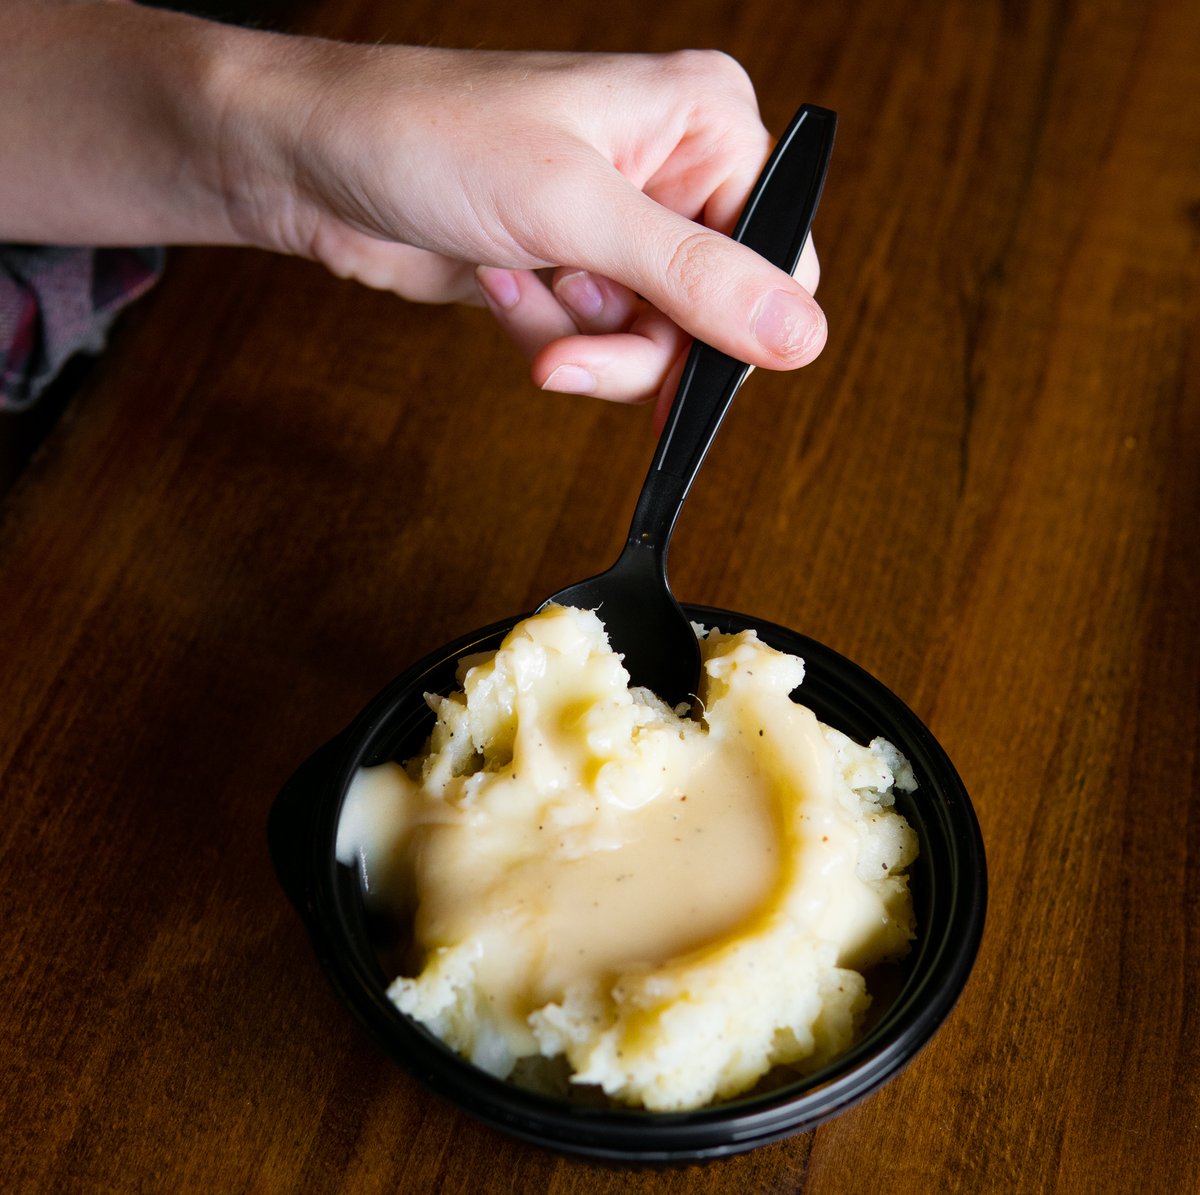 Just getting a good scoop of some mashed potatoes and gravy 😋

#MashedPotatoes #SouthernStyle #Cbusfood #CbusFoodie #columbus #grandvieweats #columbusfoodie #columbusfood #ohioeats #ohiogram #LocalEats #ColumbusFoodScene #HungryInColumbus #LocalFlavor